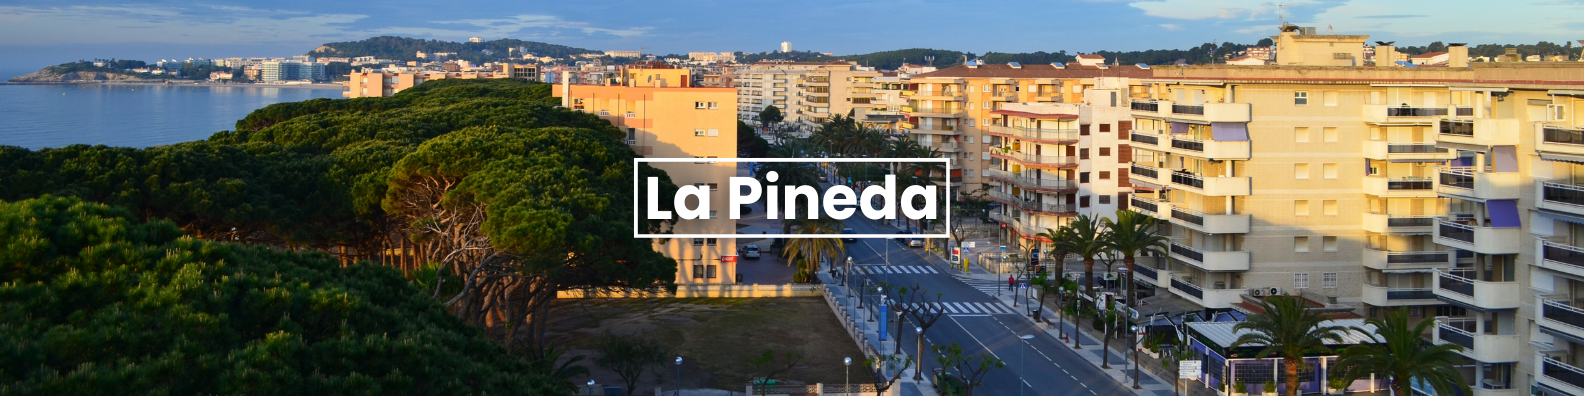 an aerial view of a city with a sign that says la pineda